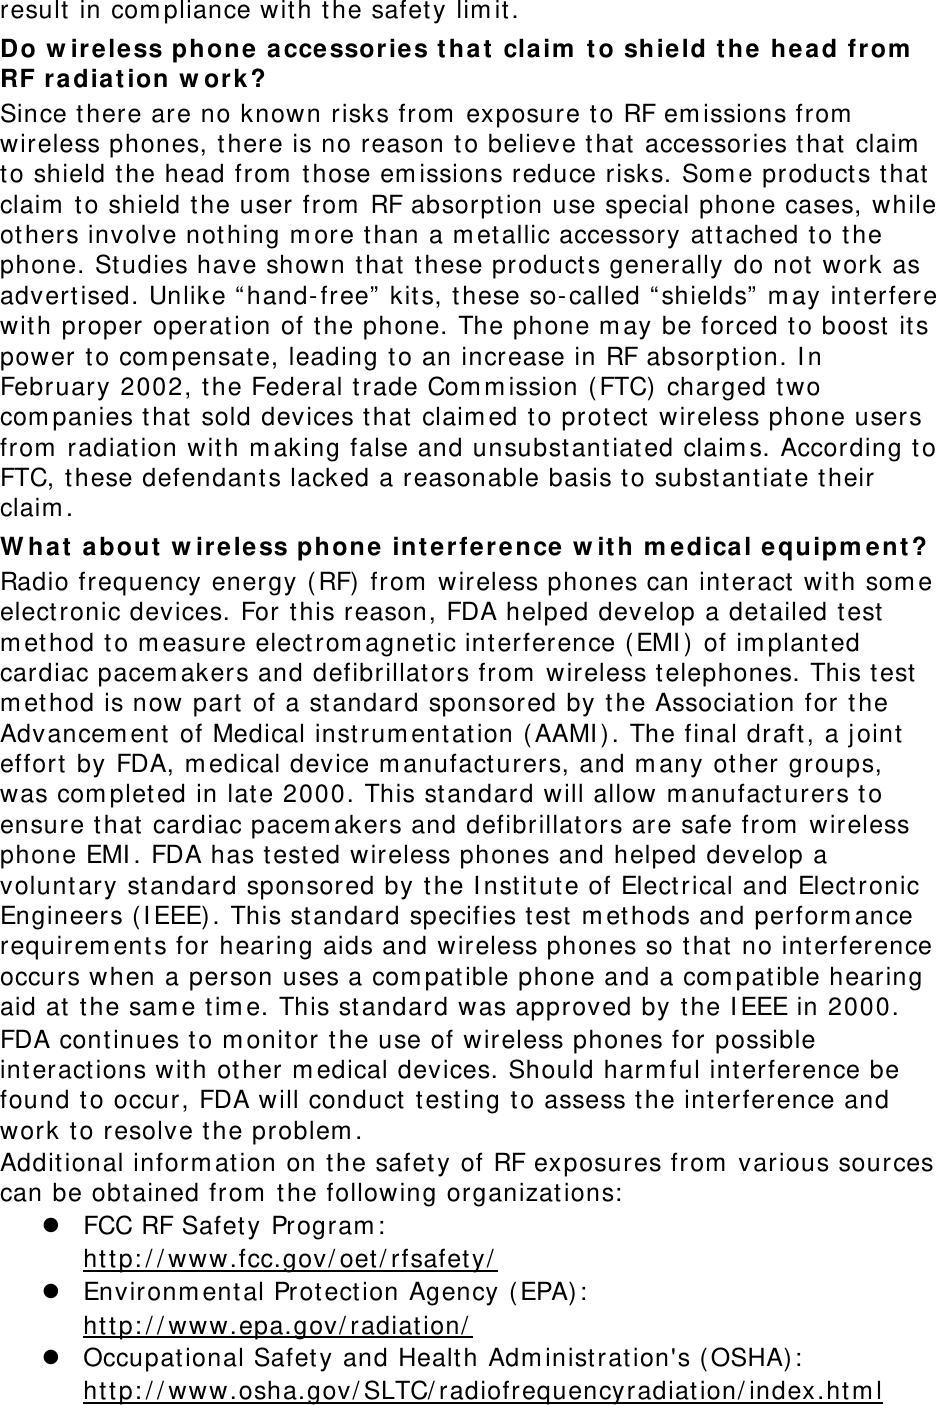 result in compliance with the safety limit. Do wireless phone accessories that claim to shield the head from RF radiation work? Since there are no known risks from exposure to RF emissions from wireless phones, there is no reason to believe that accessories that claim to shield the head from those emissions reduce risks. Some products that claim to shield the user from RF absorption use special phone cases, while others involve nothing more than a metallic accessory attached to the phone. Studies have shown that these products generally do not work as advertised. Unlike “hand-free” kits, these so-called “shields” may interfere with proper operation of the phone. The phone may be forced to boost its power to compensate, leading to an increase in RF absorption. In February 2002, the Federal trade Commission (FTC) charged two companies that sold devices that claimed to protect wireless phone users from radiation with making false and unsubstantiated claims. According to FTC, these defendants lacked a reasonable basis to substantiate their claim. What about wireless phone interference with medical equipment? Radio frequency energy (RF) from wireless phones can interact with some electronic devices. For this reason, FDA helped develop a detailed test method to measure electromagnetic interference (EMI) of implanted cardiac pacemakers and defibrillators from wireless telephones. This test method is now part of a standard sponsored by the Association for the Advancement of Medical instrumentation (AAMI). The final draft, a joint effort by FDA, medical device manufacturers, and many other groups, was completed in late 2000. This standard will allow manufacturers to ensure that cardiac pacemakers and defibrillators are safe from wireless phone EMI. FDA has tested wireless phones and helped develop a voluntary standard sponsored by the Institute of Electrical and Electronic Engineers (IEEE). This standard specifies test methods and performance requirements for hearing aids and wireless phones so that no interference occurs when a person uses a compatible phone and a compatible hearing aid at the same time. This standard was approved by the IEEE in 2000. FDA continues to monitor the use of wireless phones for possible interactions with other medical devices. Should harmful interference be found to occur, FDA will conduct testing to assess the interference and work to resolve the problem. Additional information on the safety of RF exposures from various sources can be obtained from the following organizations:  FCC RF Safety Program:  http://www.fcc.gov/oet/rfsafety/  Environmental Protection Agency (EPA):  http://www.epa.gov/radiation/  Occupational Safety and Health Administration&apos;s (OSHA):        http://www.osha.gov/SLTC/radiofrequencyradiation/index.html 